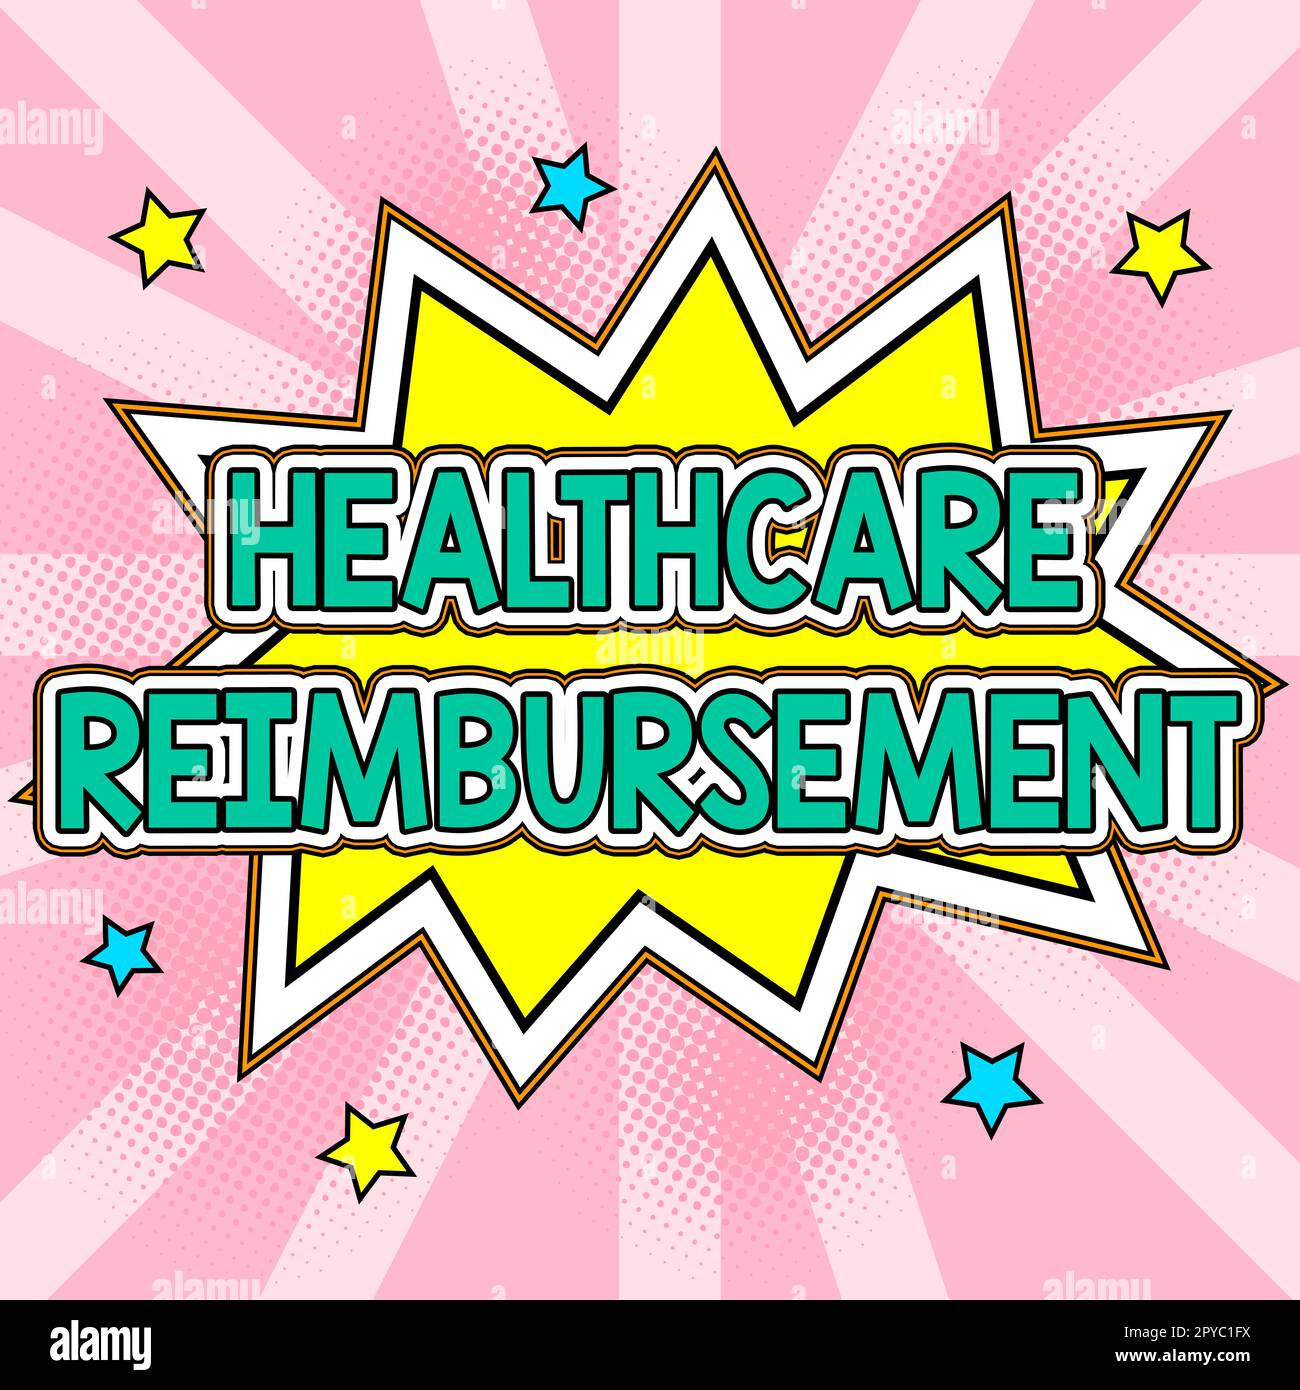 Sign displaying Healthcare Reimbursement. Business overview paid by insurers through a payment program Stock Photo